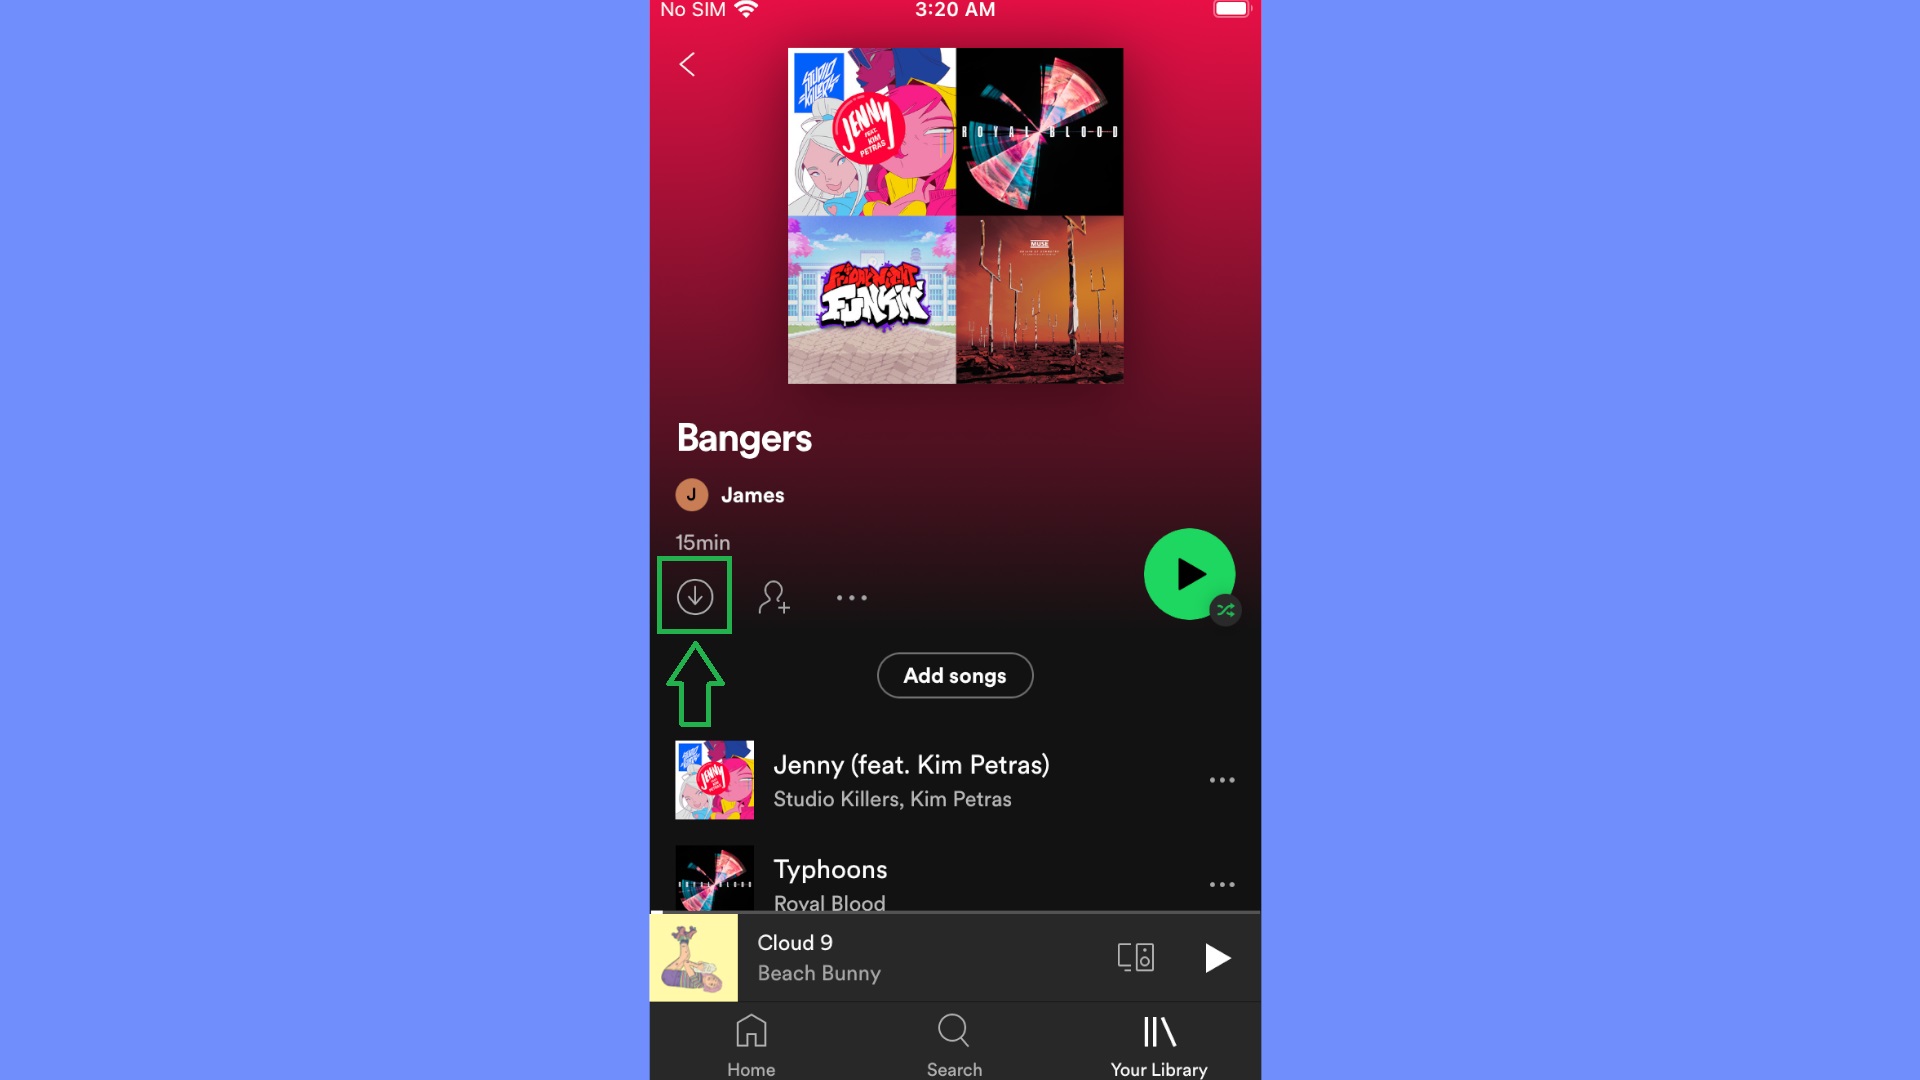 How to Download Songs in Spotify on iOS Step 1: Tap on the Download Button in the Playlist